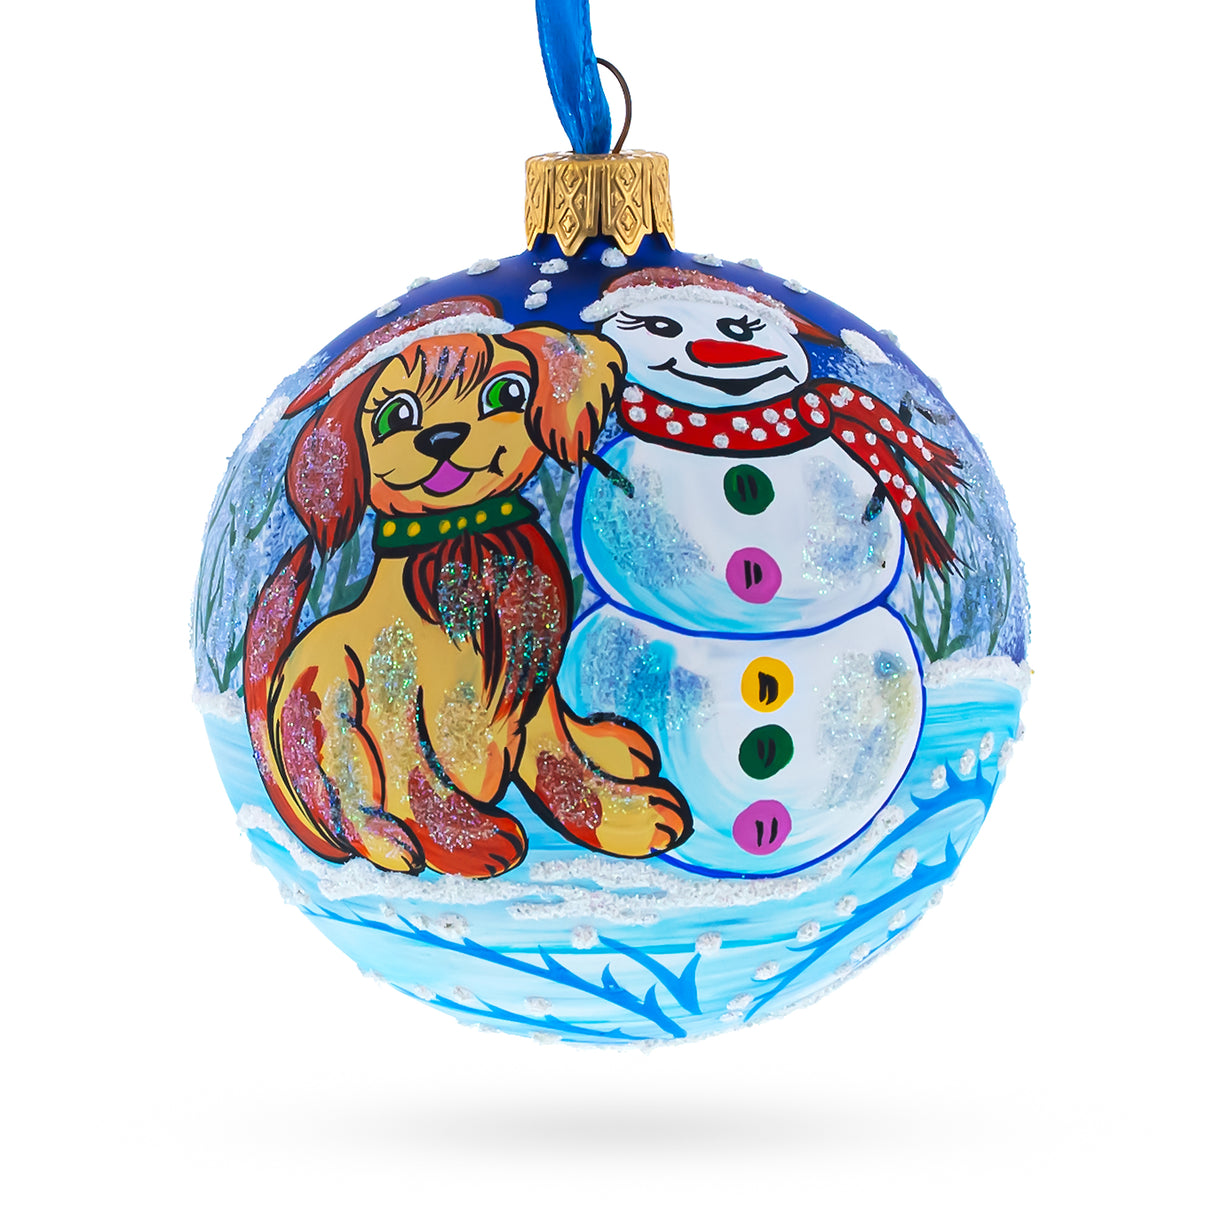 Glass Winter Wonderland Duo: Dog and Snowman - Blown Glass Ball Christmas Ornament 3.25 Inches in Blue color Round